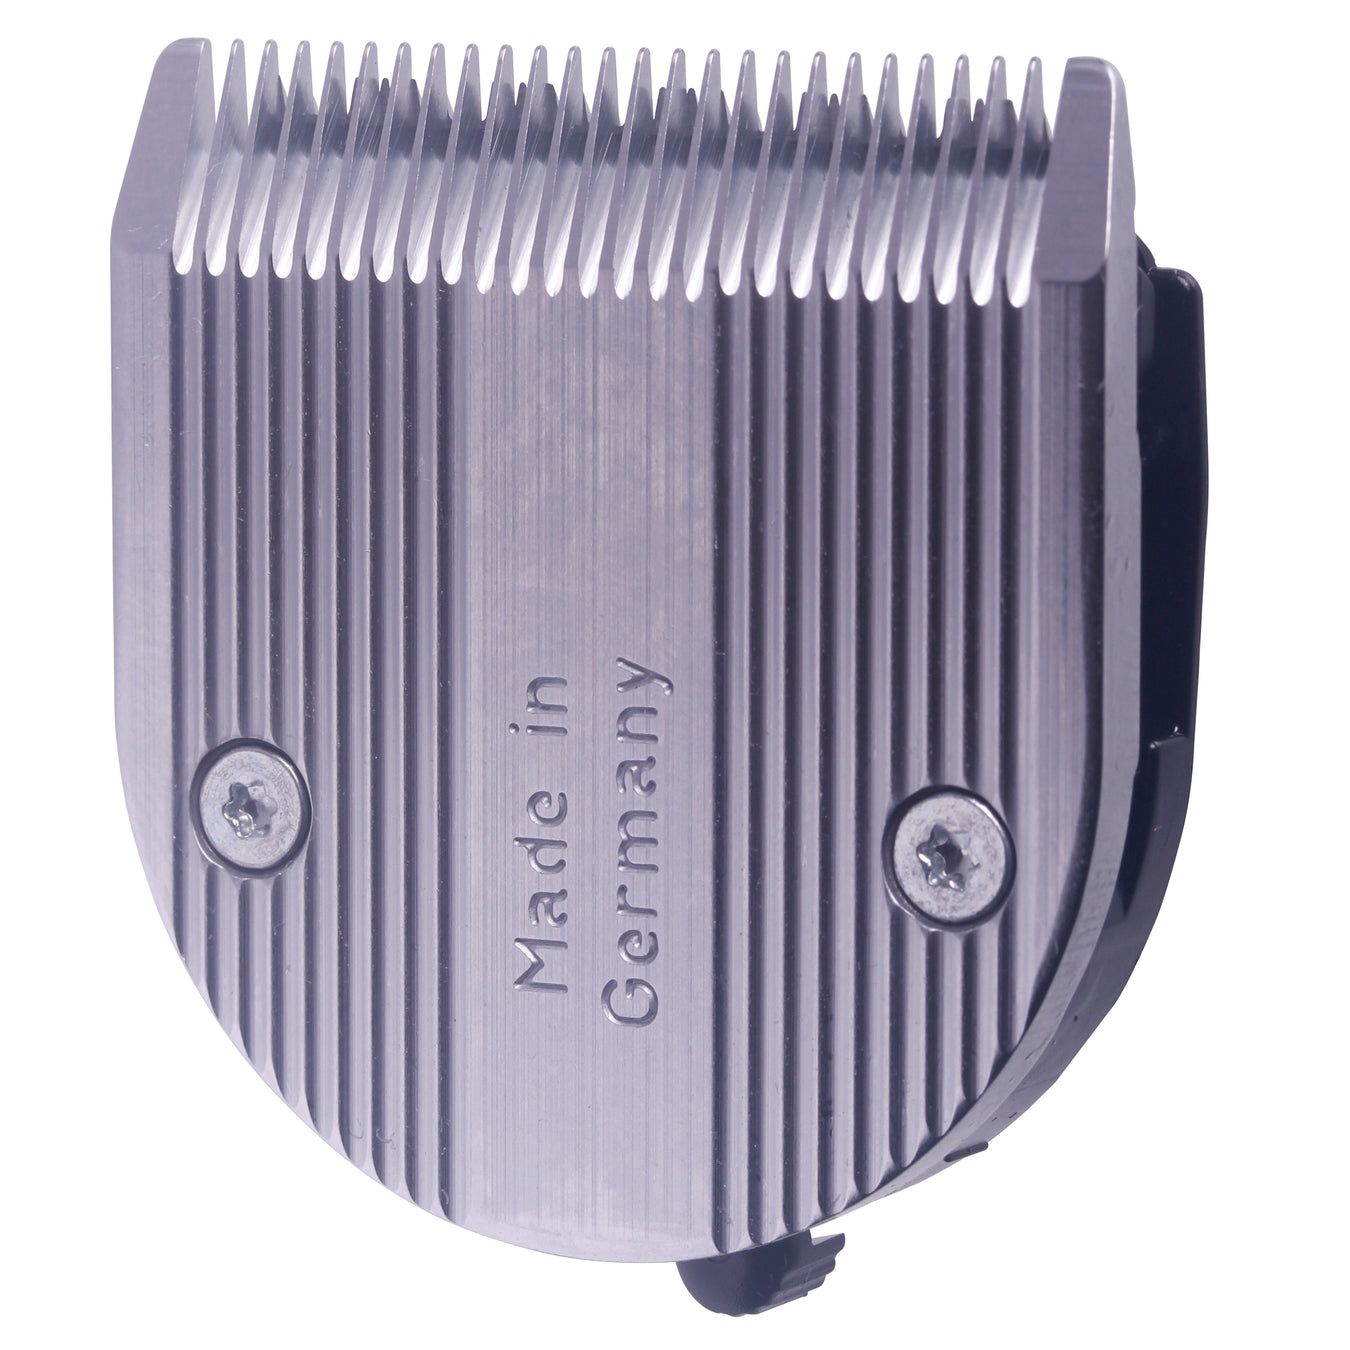 Clipper replacement blades